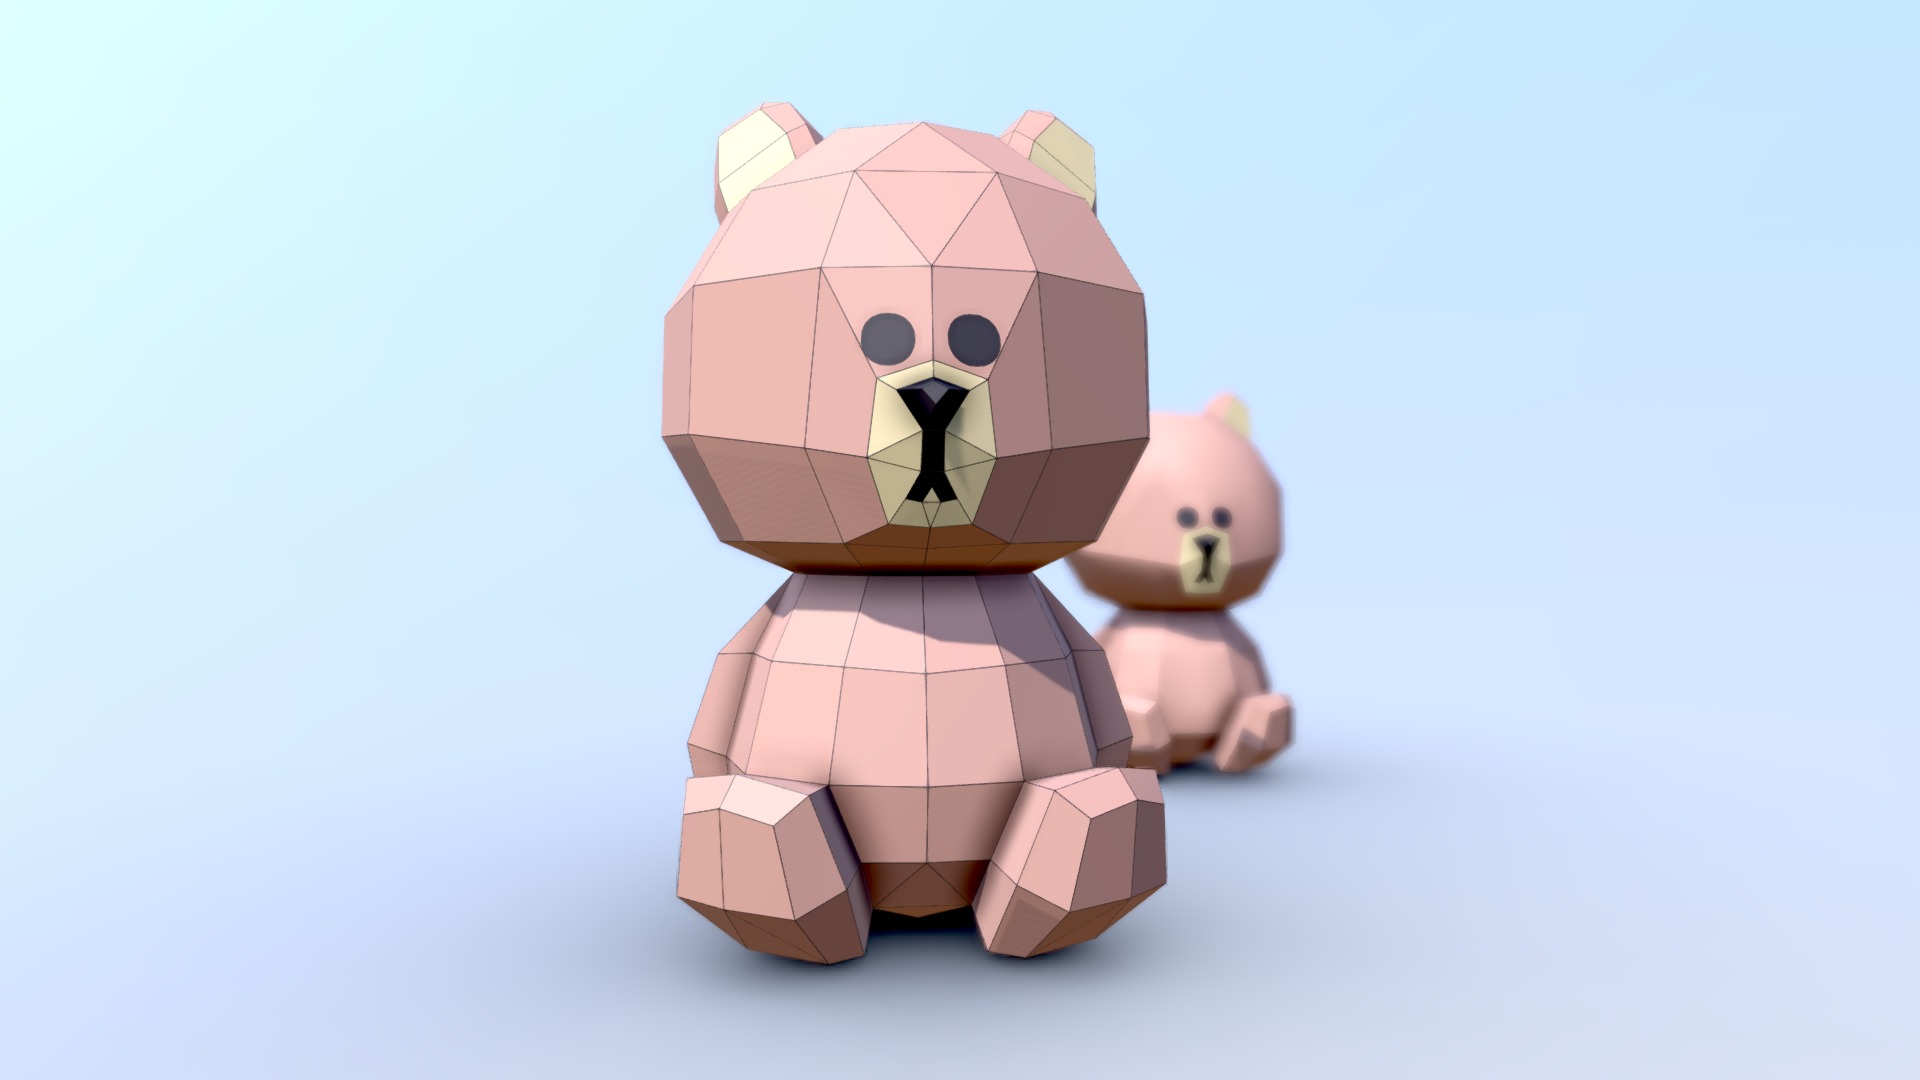 3D model Teddy bear - This is a 3D model of the Teddy bear. The 3D model is about a group of stuffed animals.